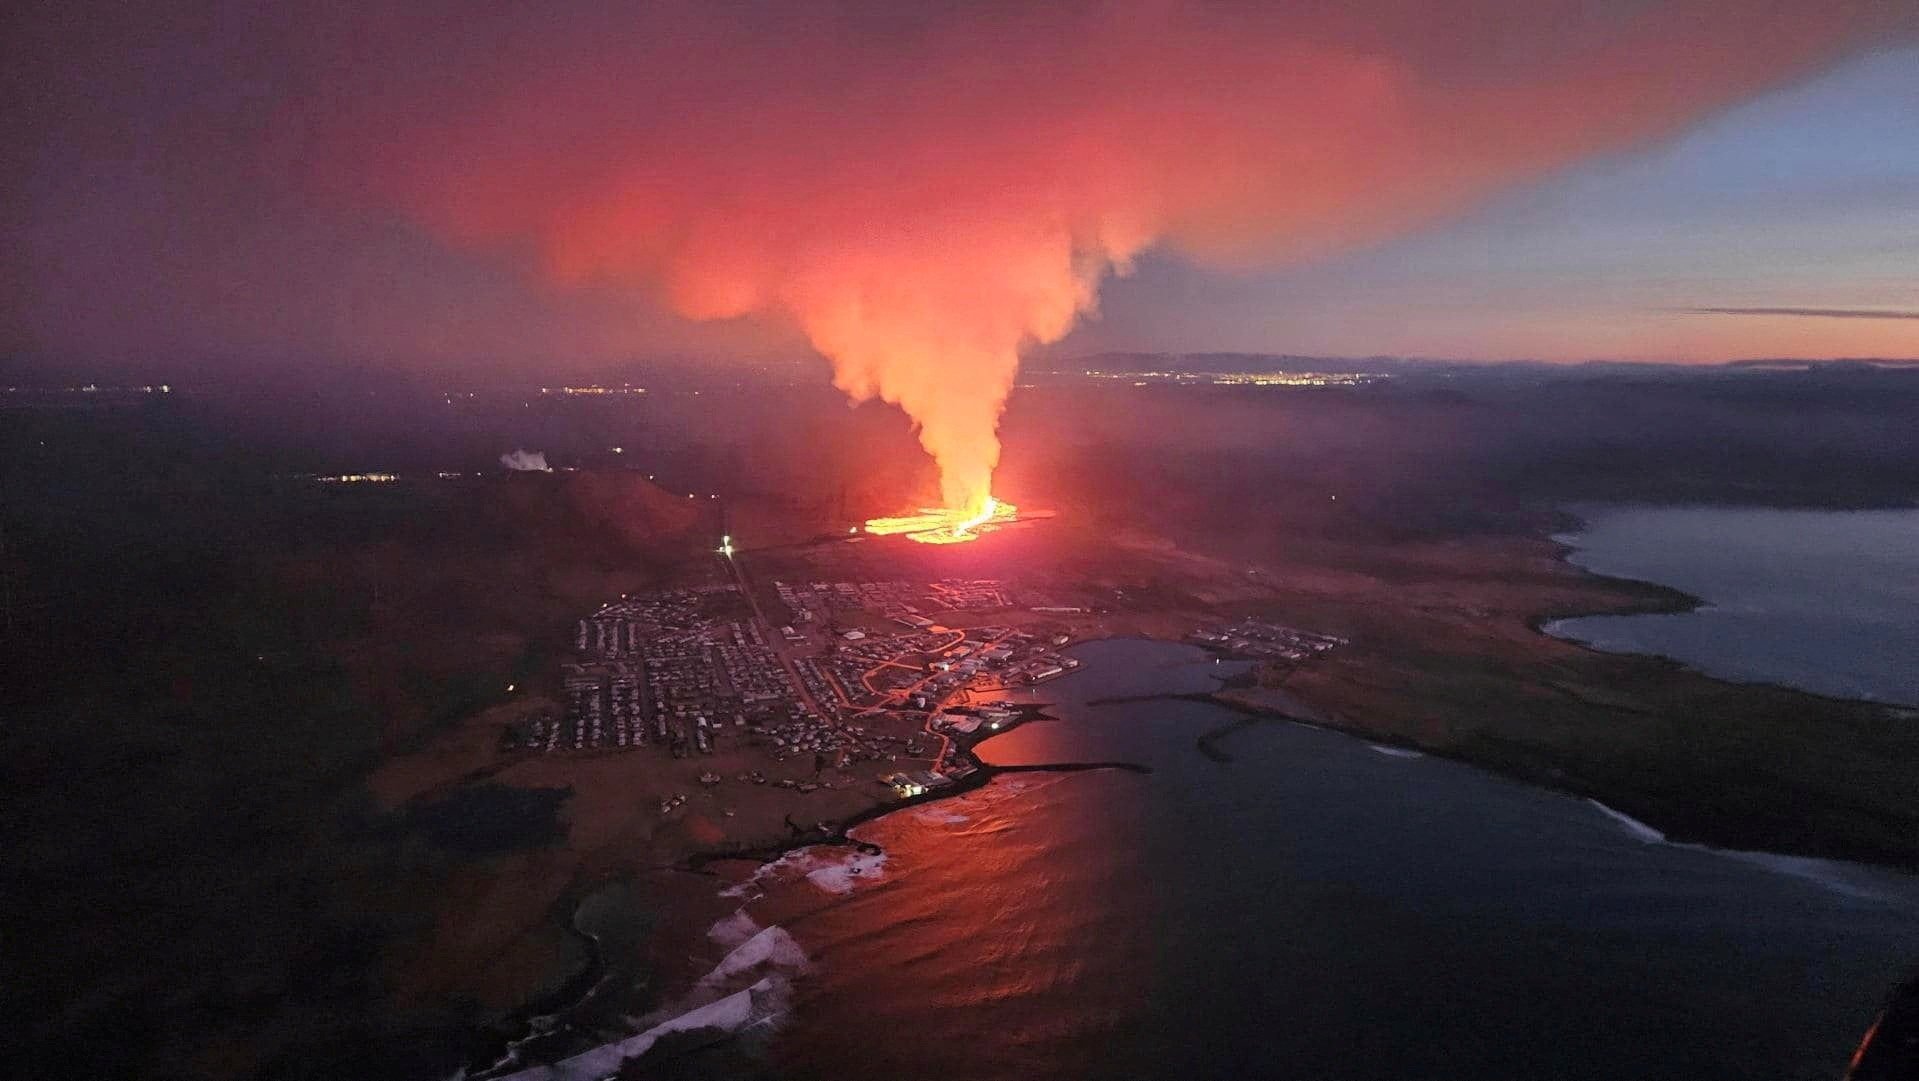 The volcano spewing lava and smoke as it erupts in Reykjanes Peninsula, Iceland. Photo: Iceland Civil Protection via Reuters